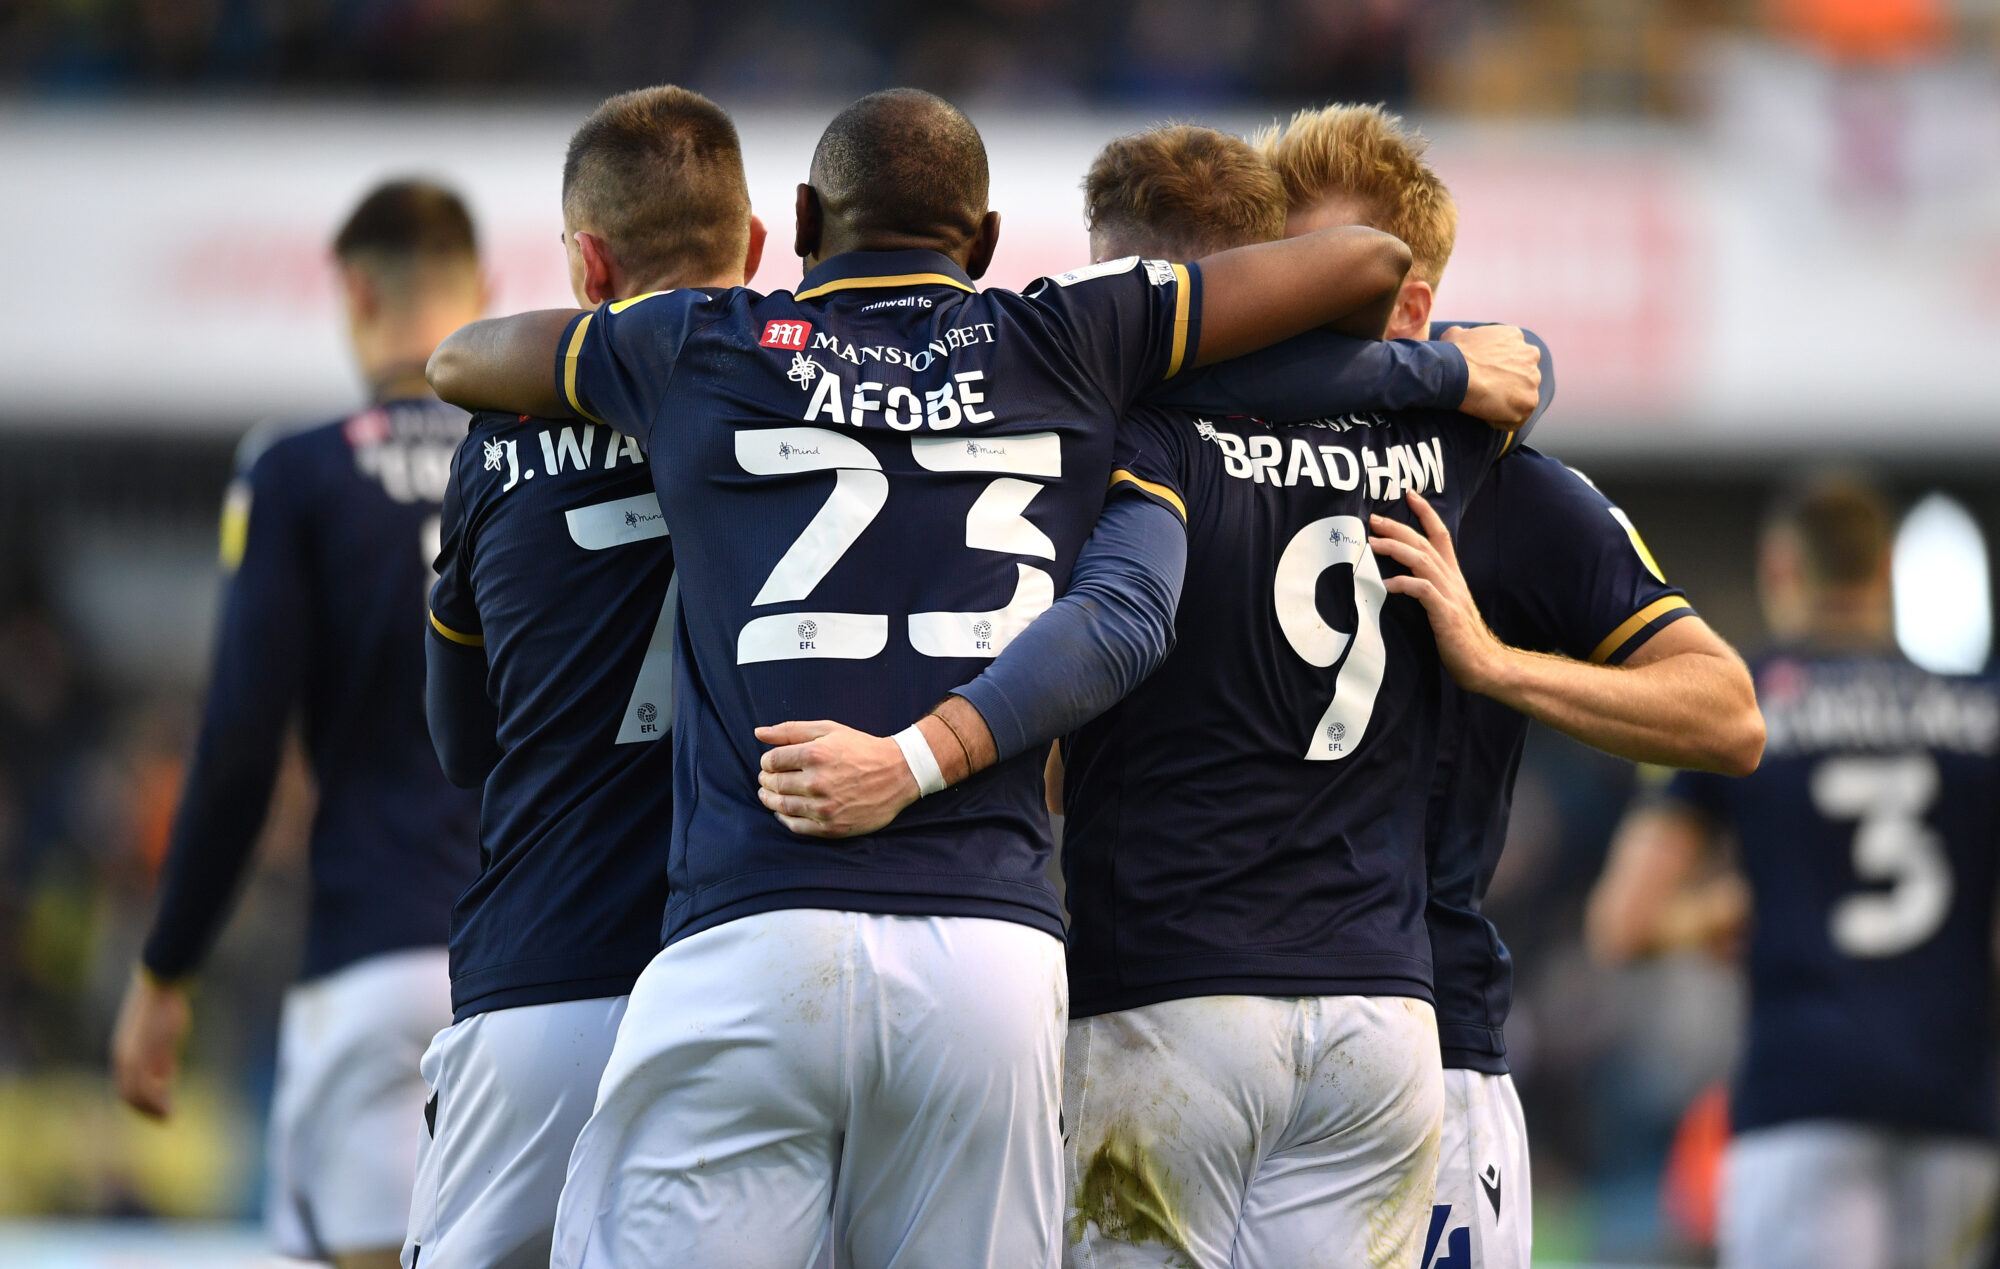 Millwall team up with Meritec Limited to launch FREE mental health course